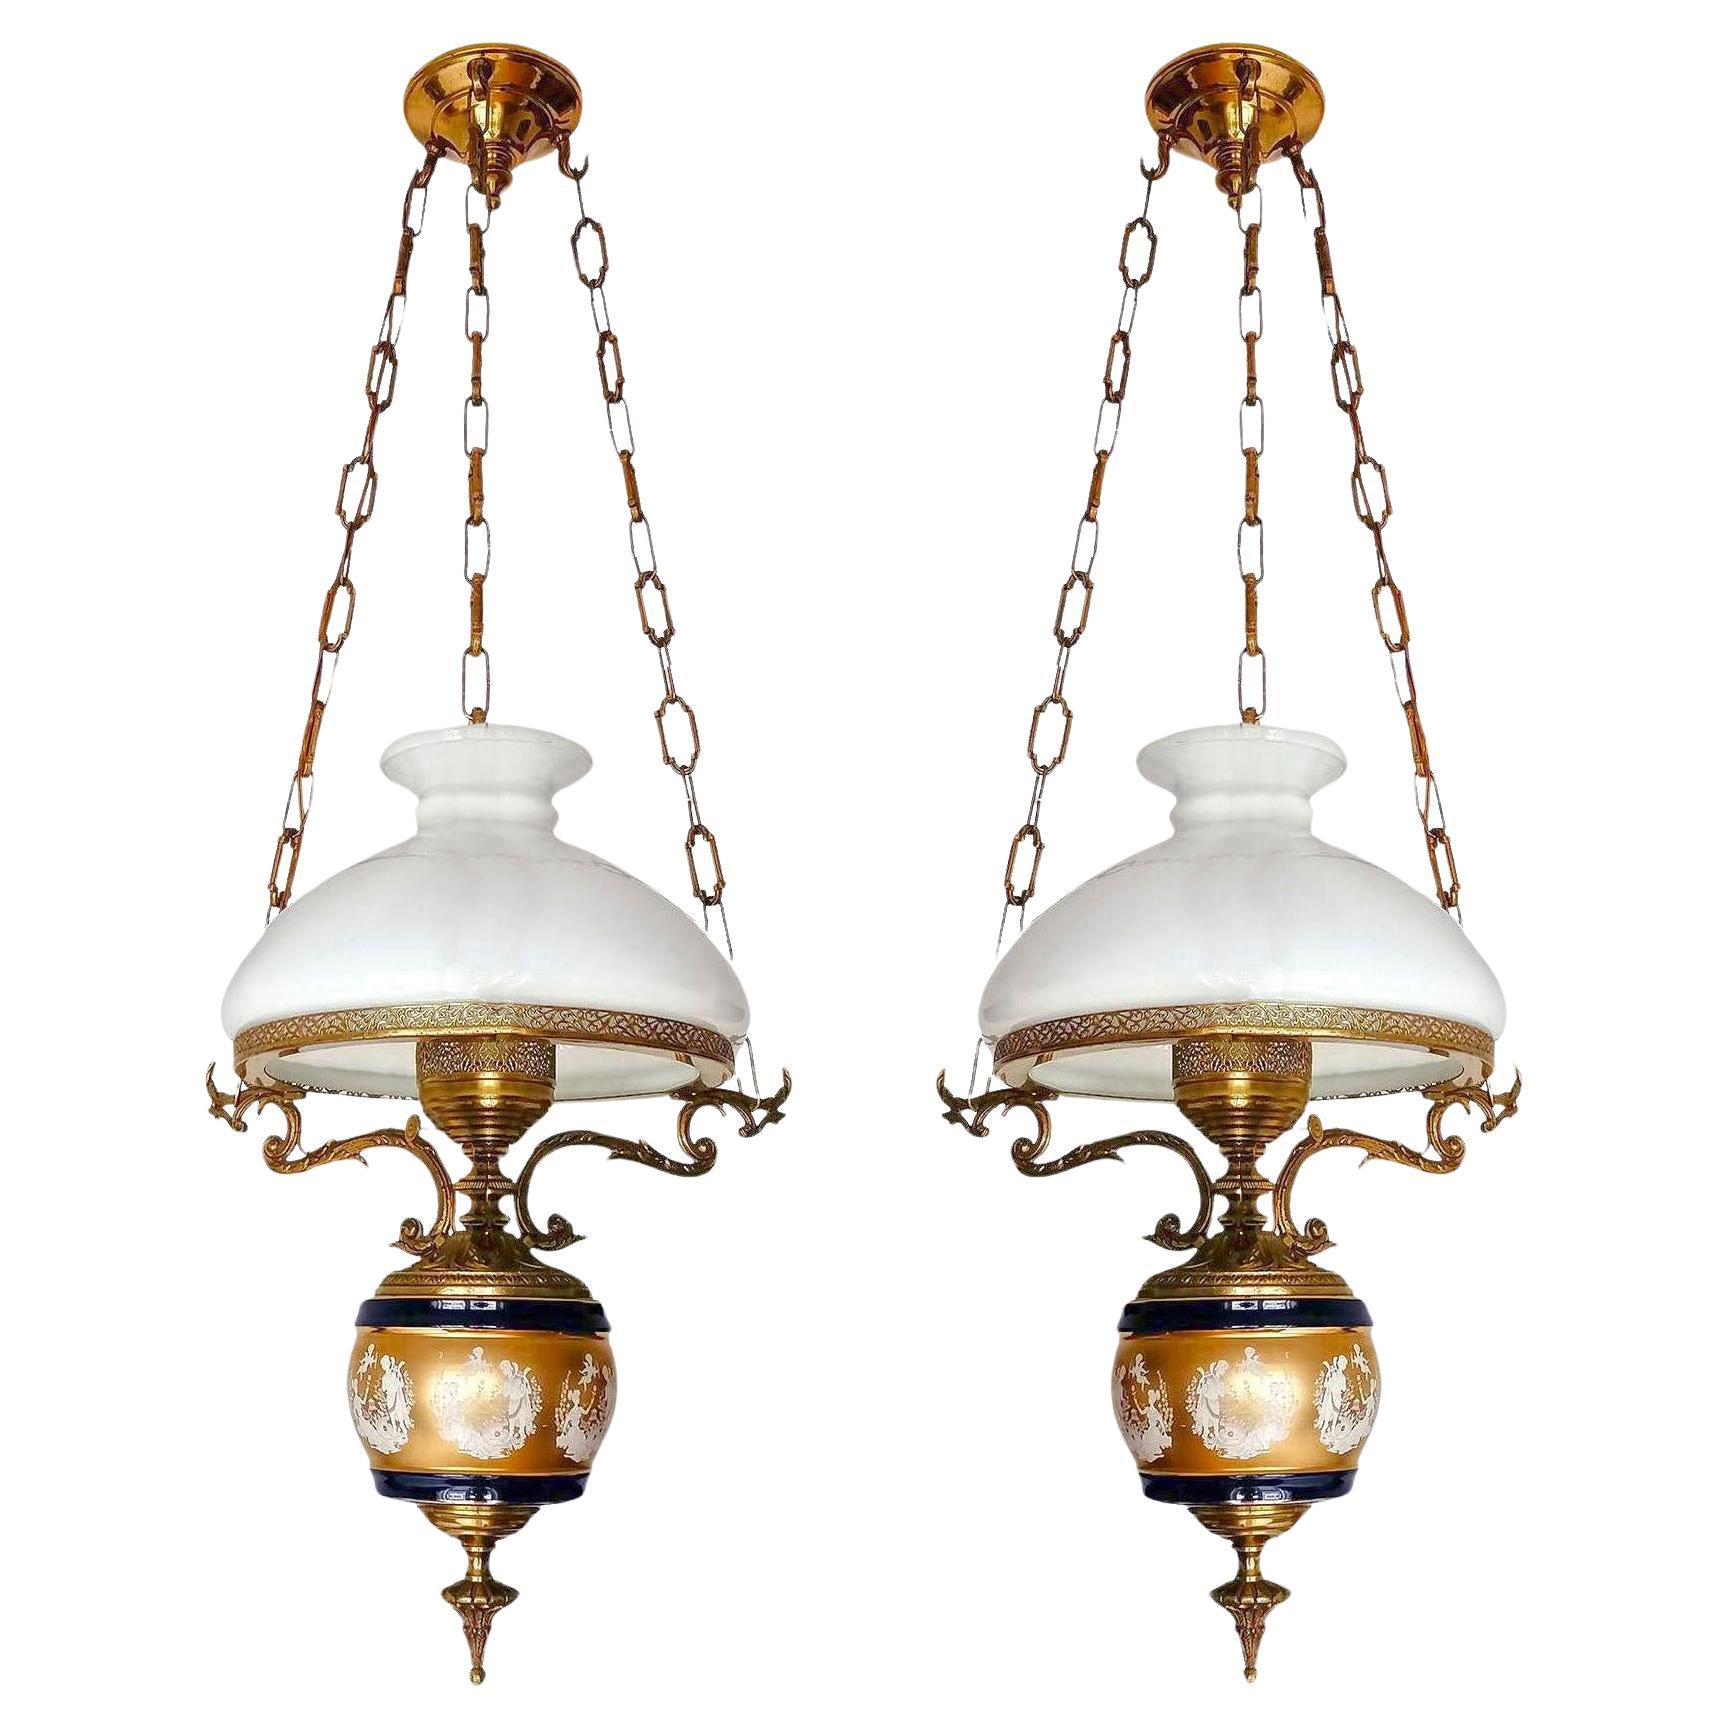 Pair of Large French Chandelier Oil Lamp in Blue & Gold Porcelain & Gilt Bronze